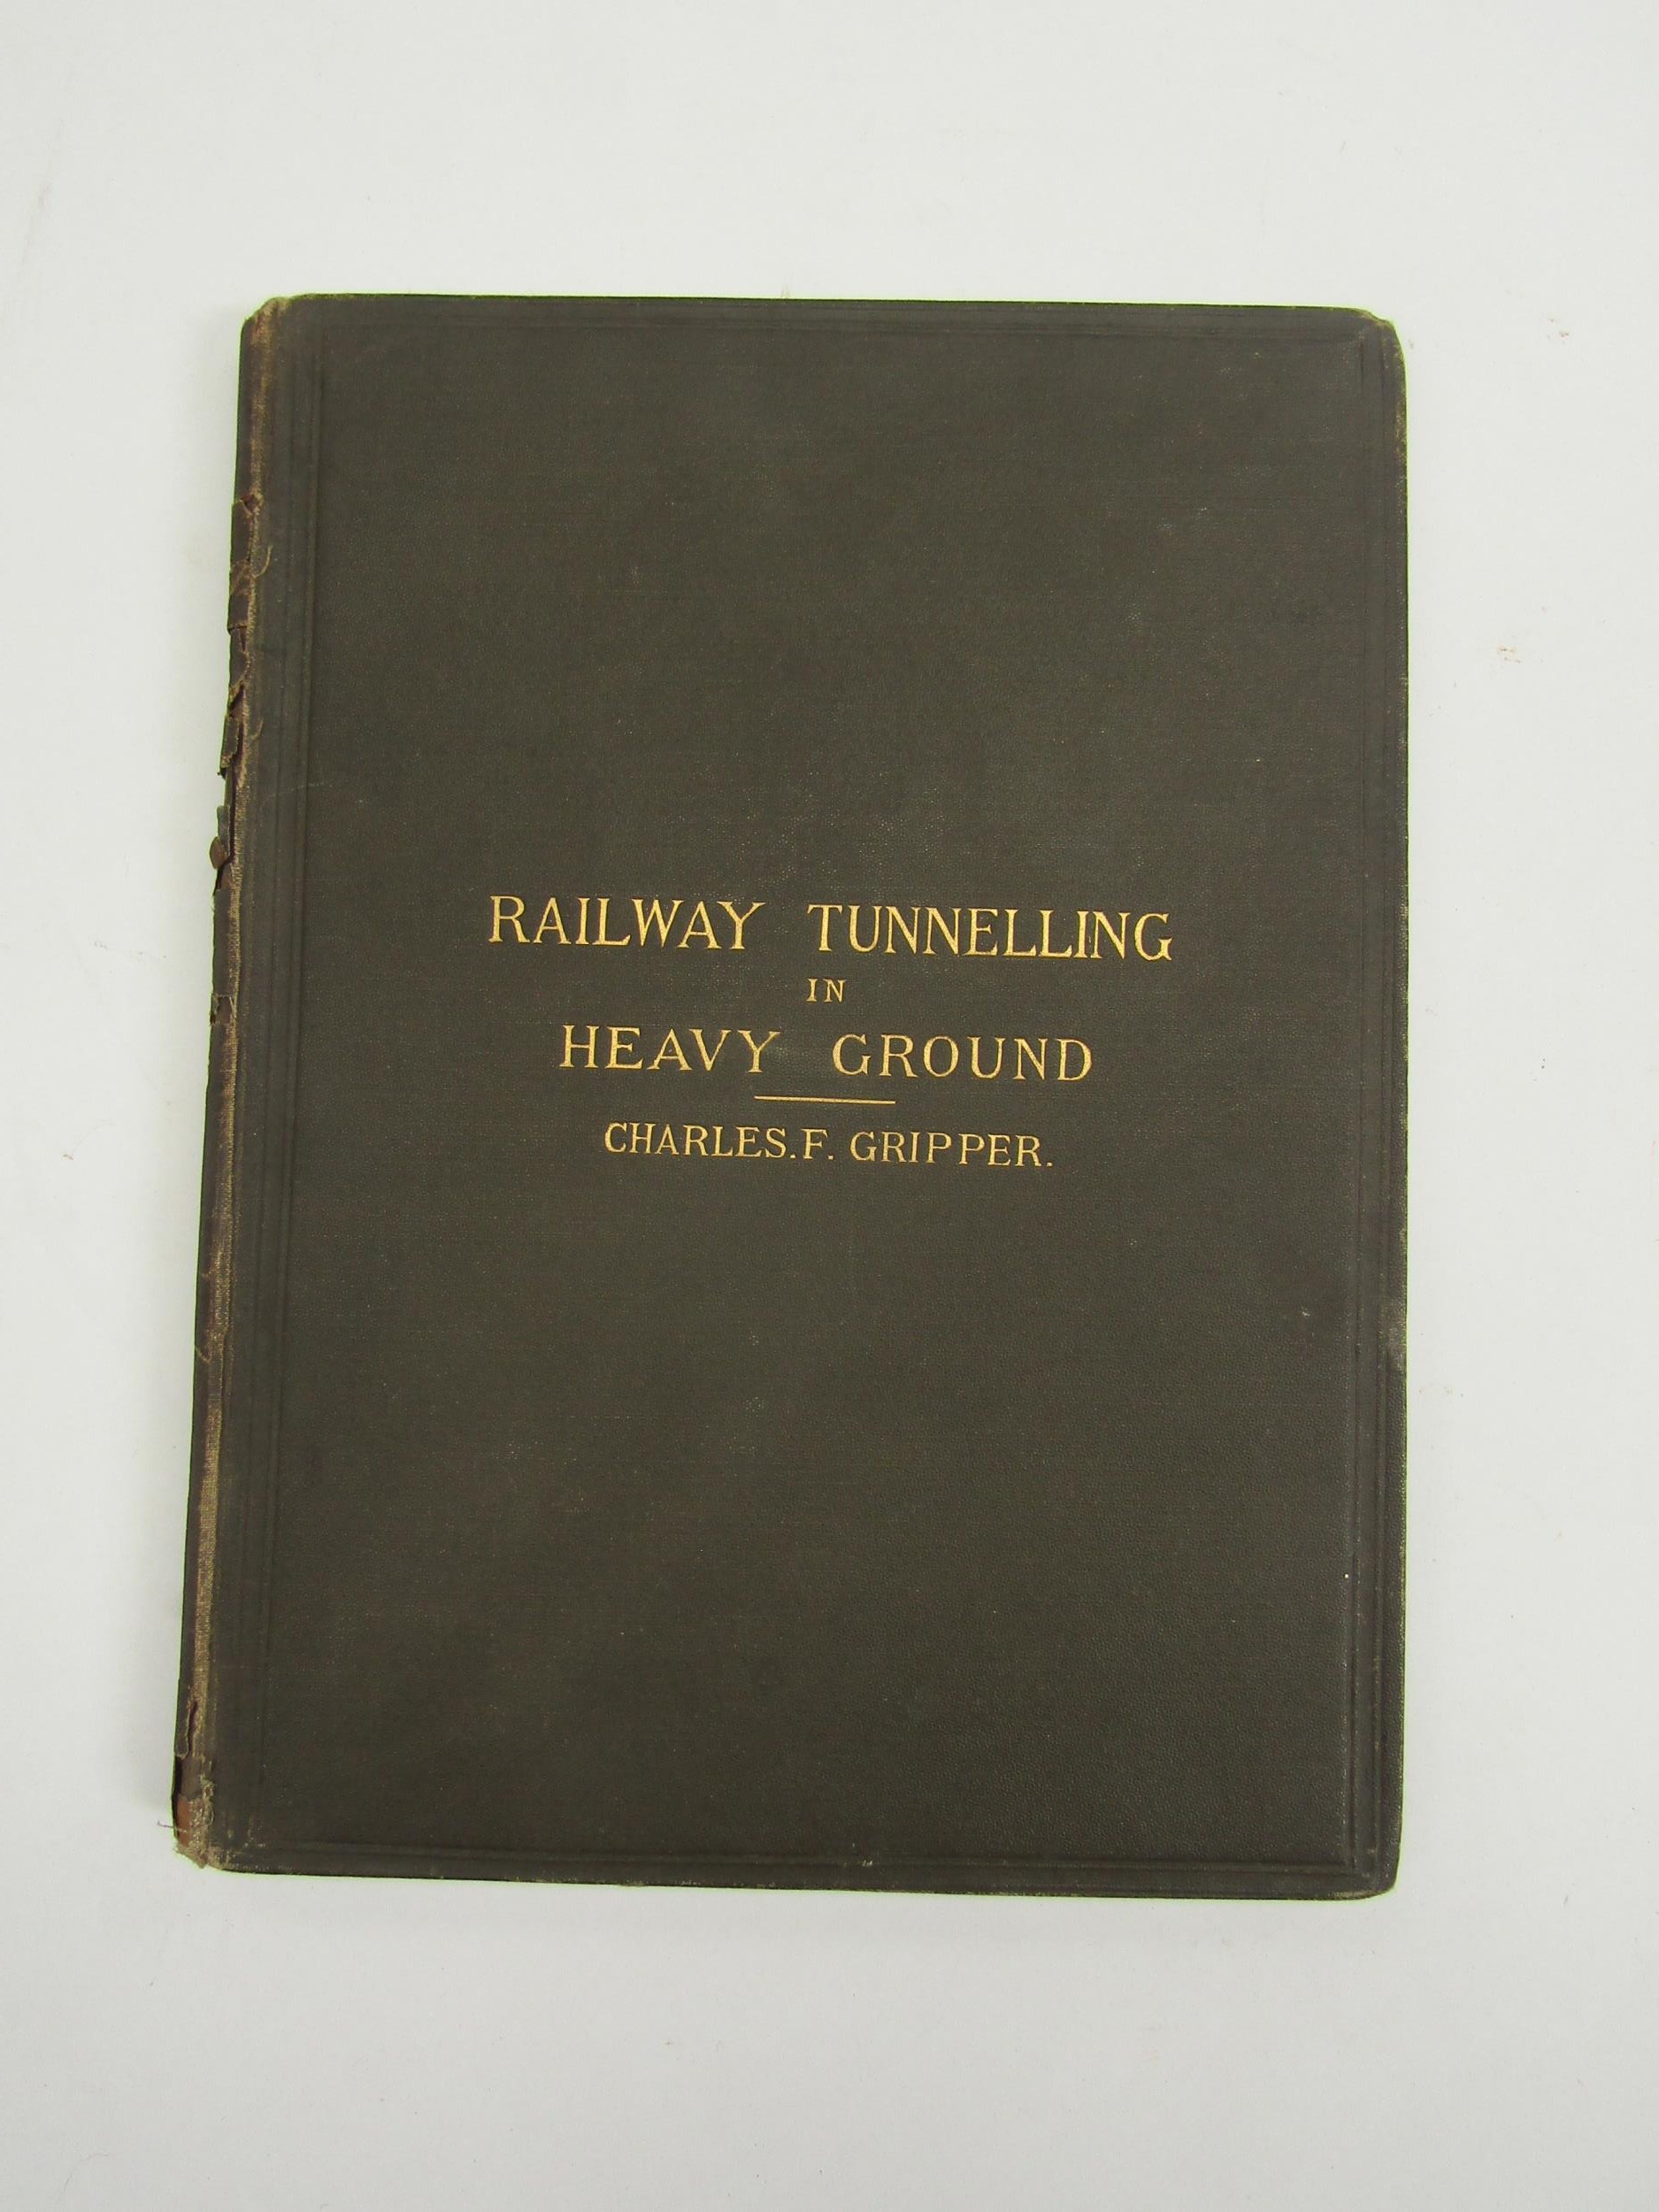 Charles F. Gripper: 'Railway Tunneling in Heavy Ground', London, Spon, 1879, 1st and only edition, 3